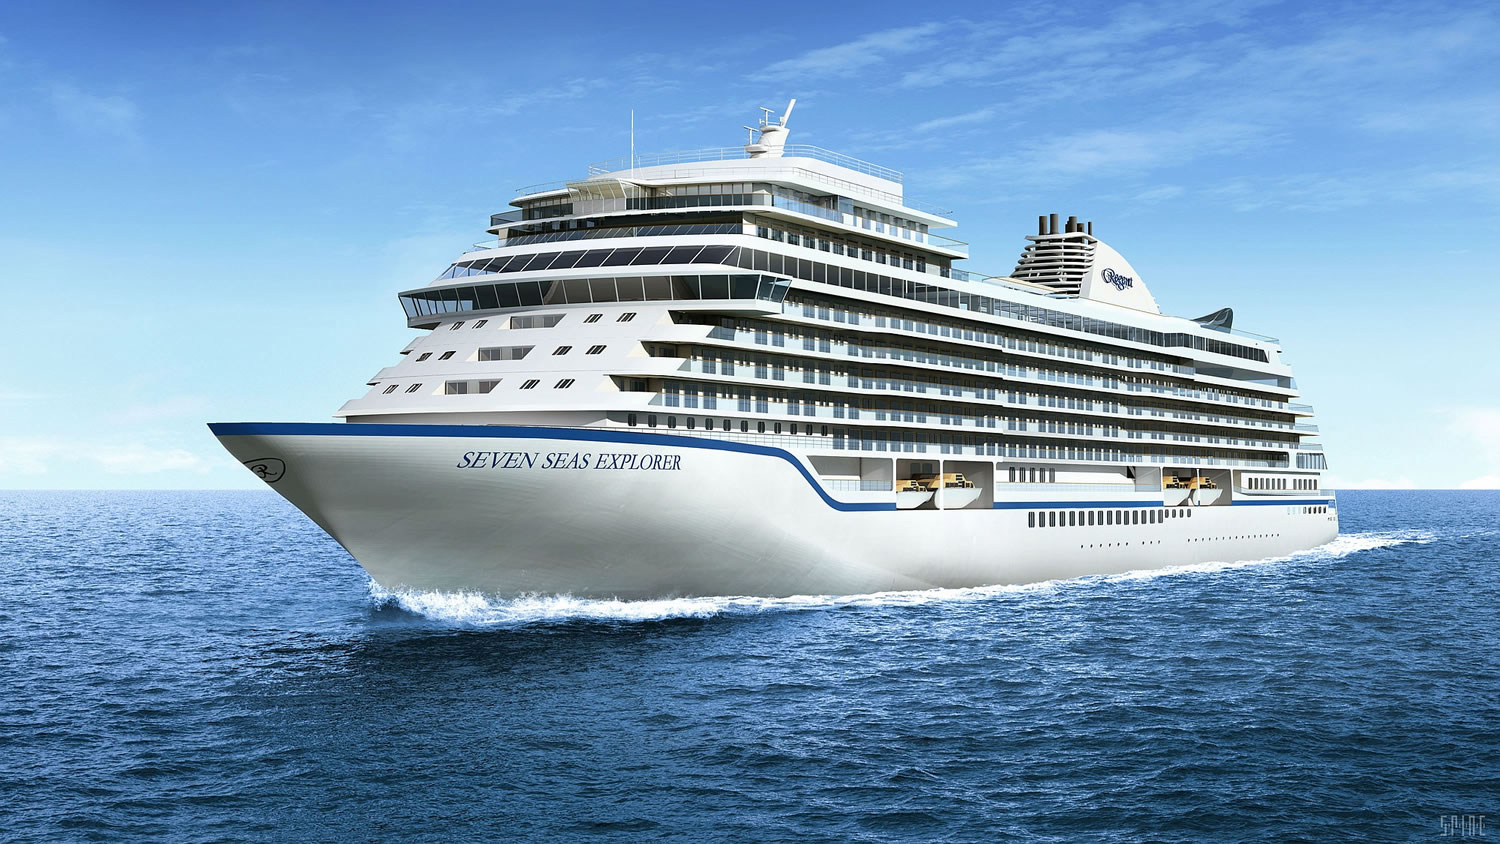 Regent Seven Seas Cruises' forthcoming ship, the Seven Seas Explorer, which is expected to debut in the summer of 2016.